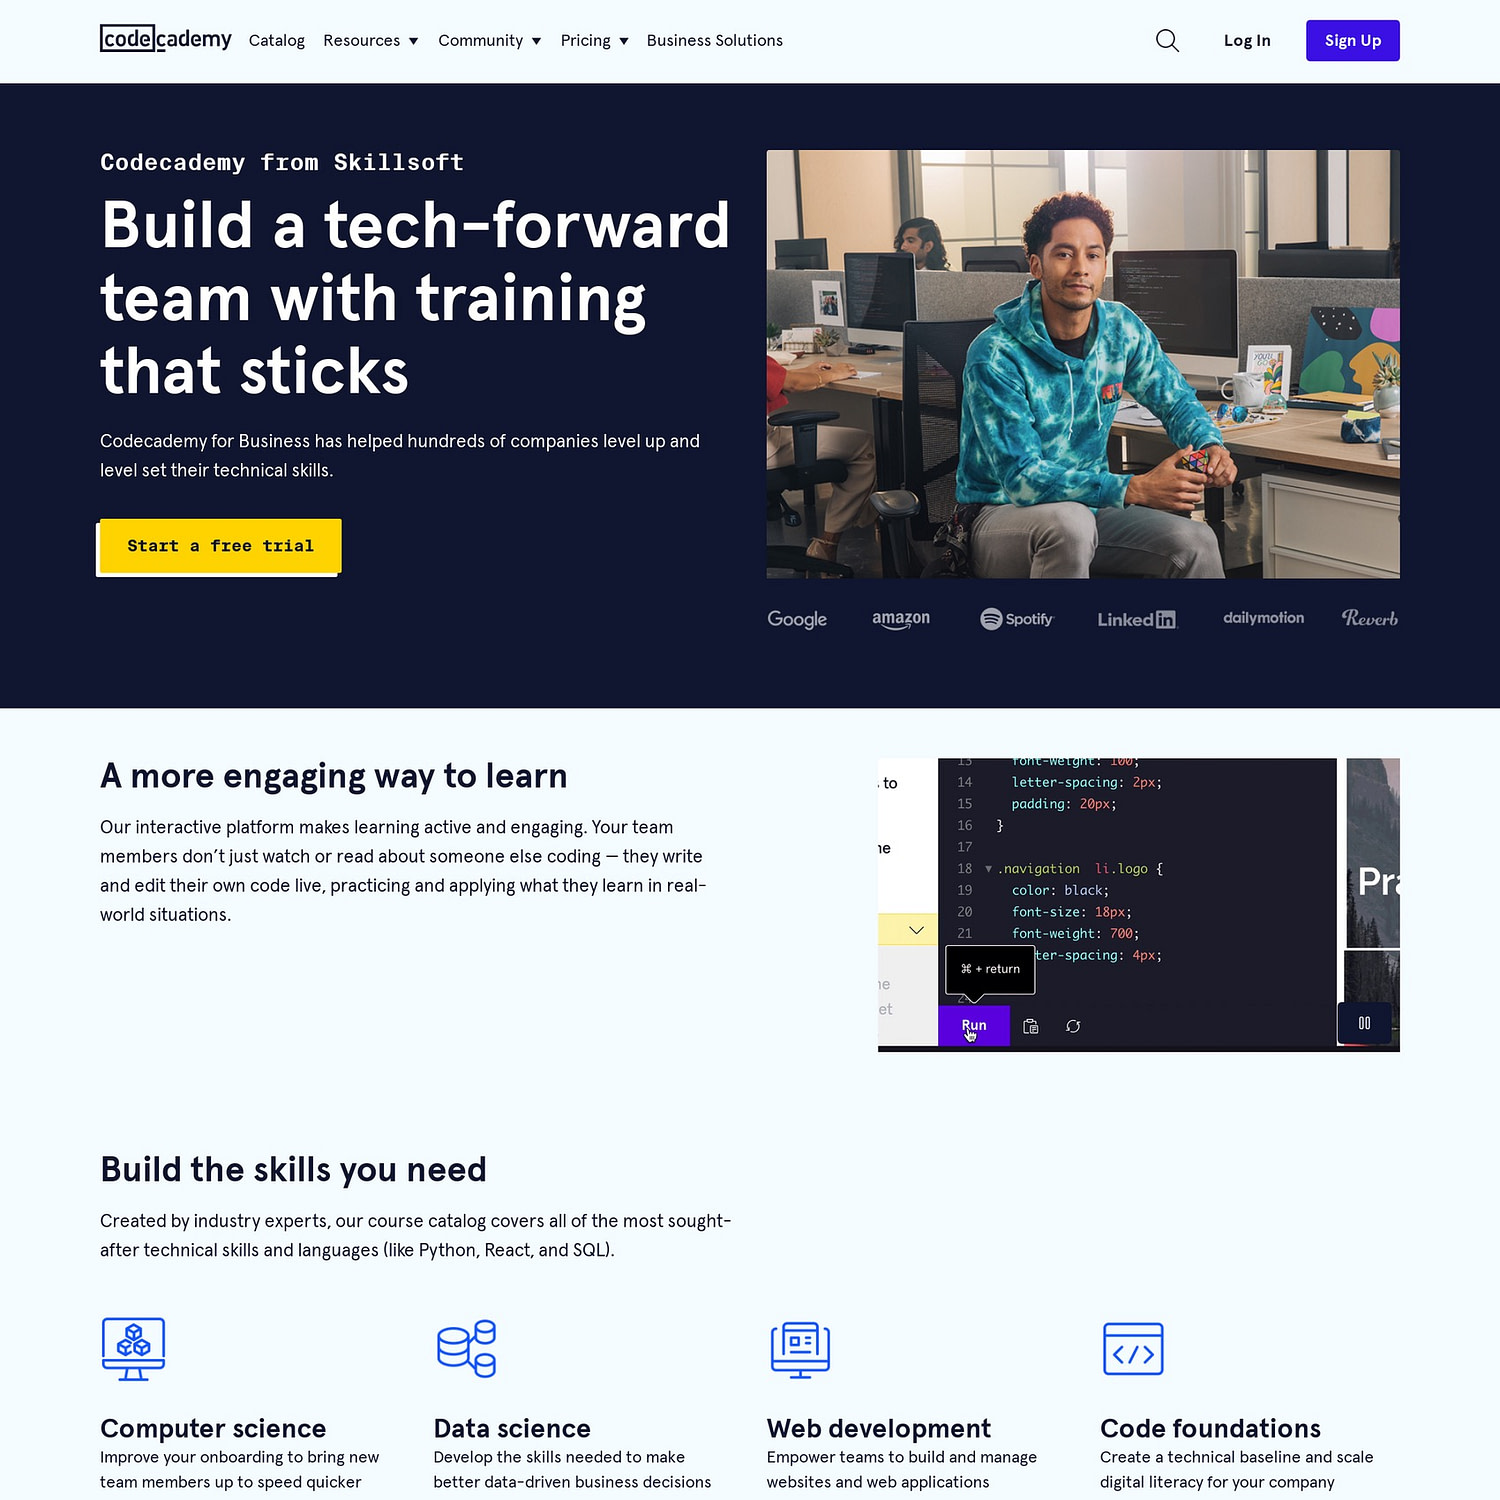 landing page examples: Codecademy